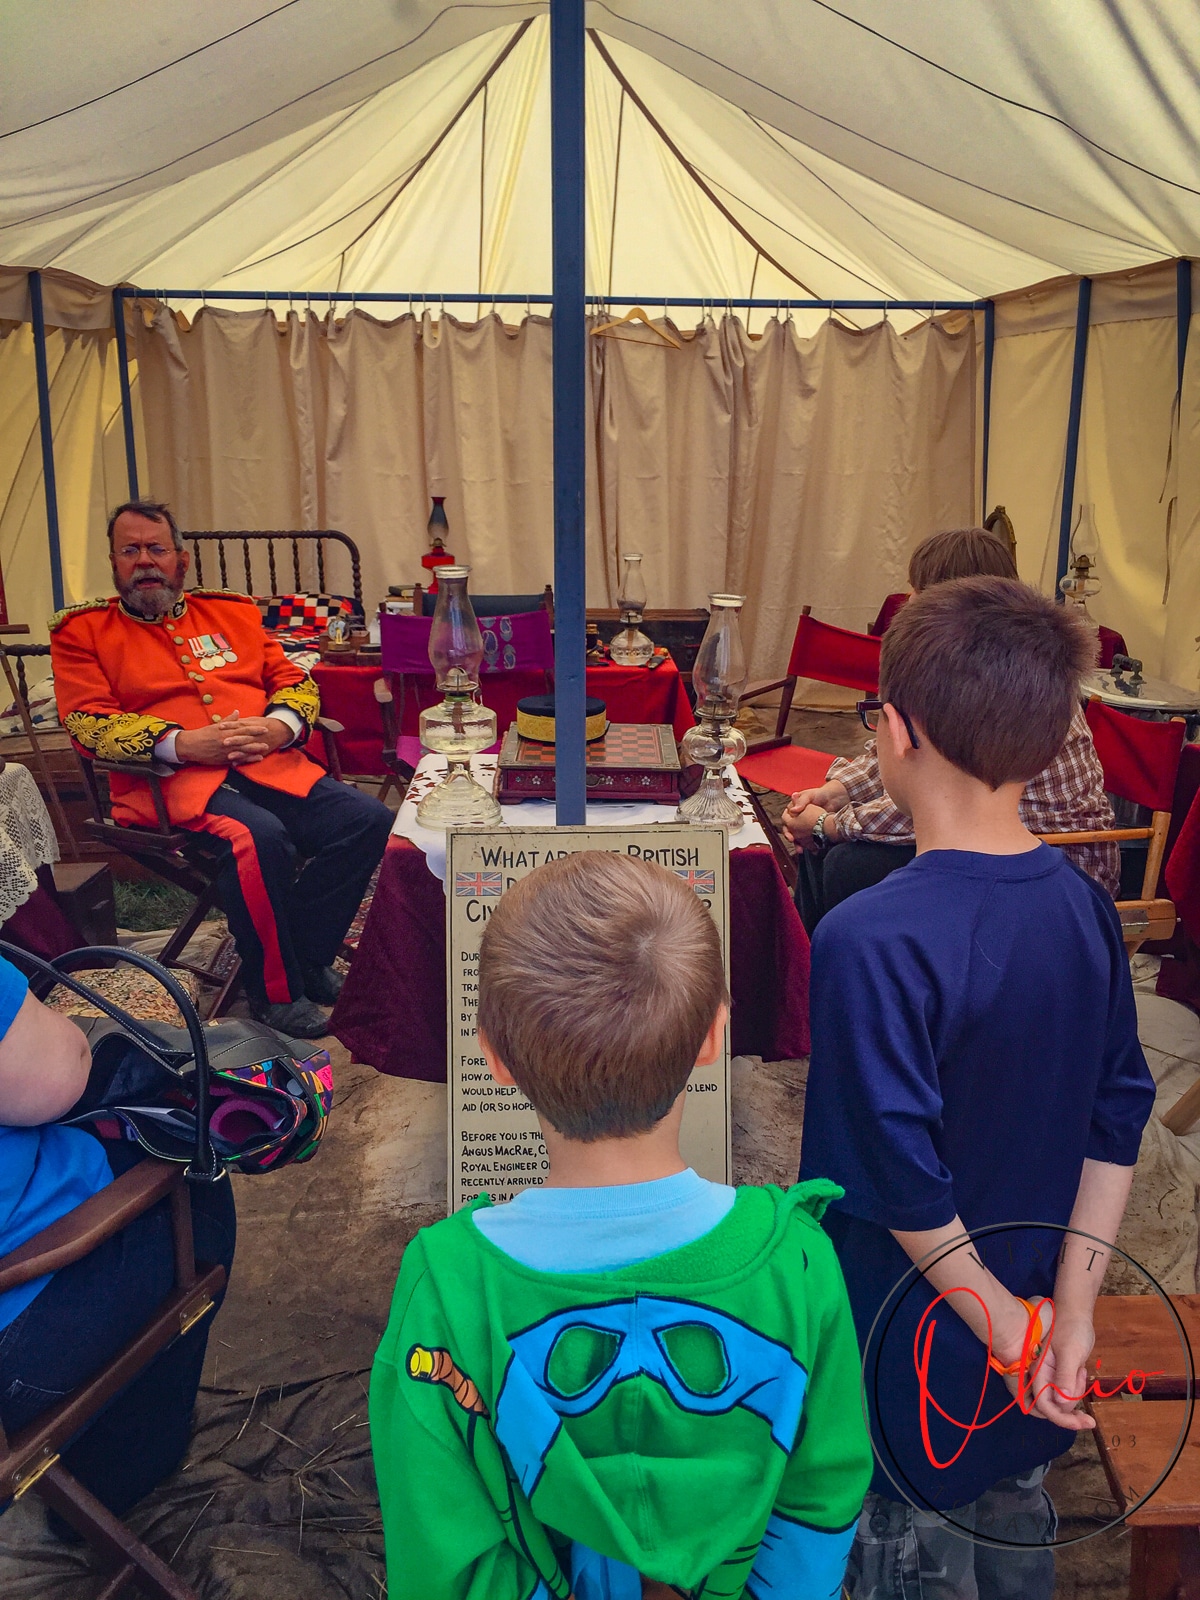 2 young children looking at a man in a red civil war coat in a tent telling a story Photo credit: Cindy Gordon of VisitOhioToday.com